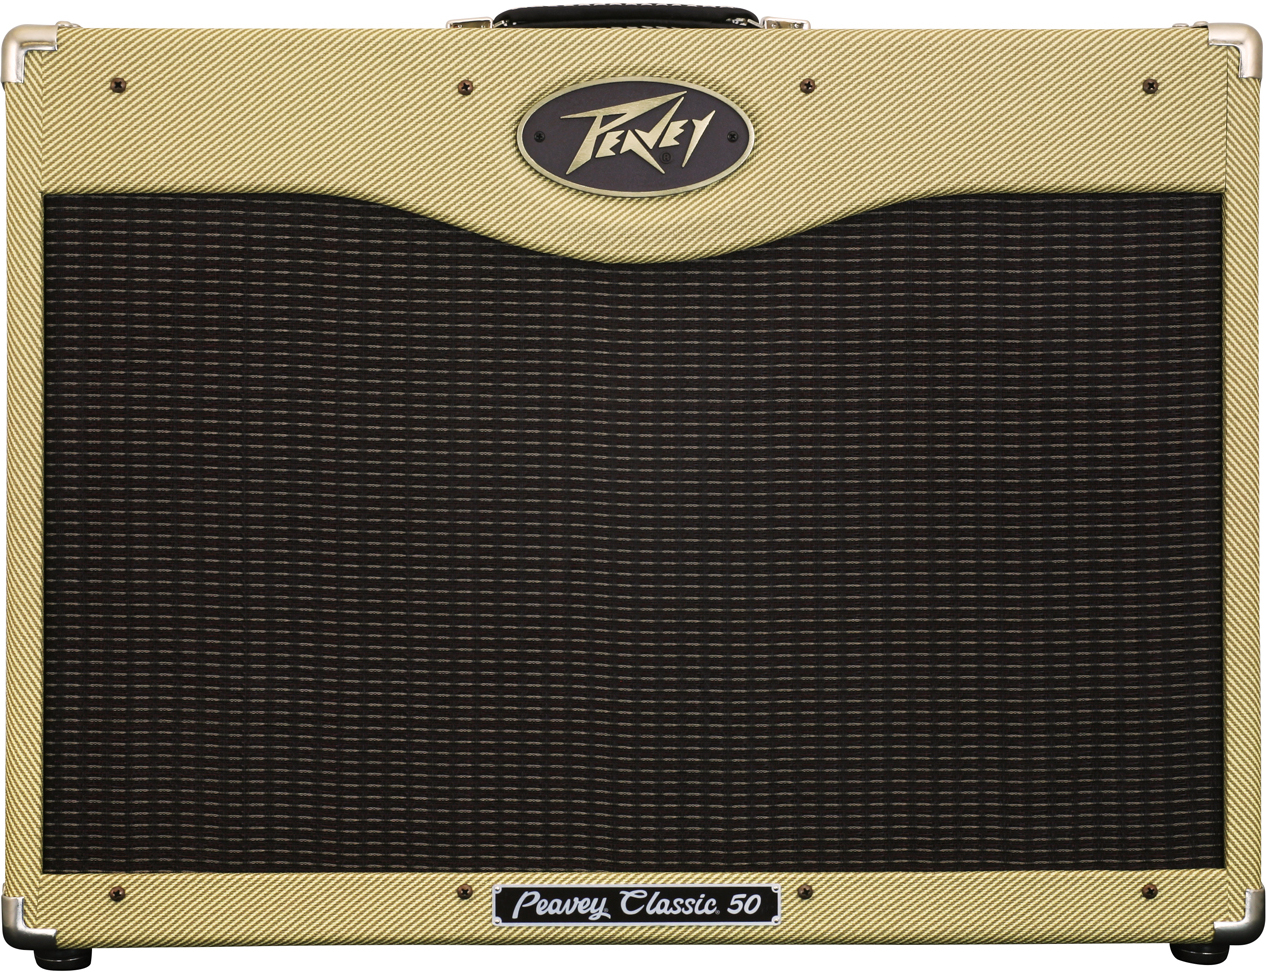 Peavey Classic 50 212 Tweed - Electric guitar combo amp - Main picture